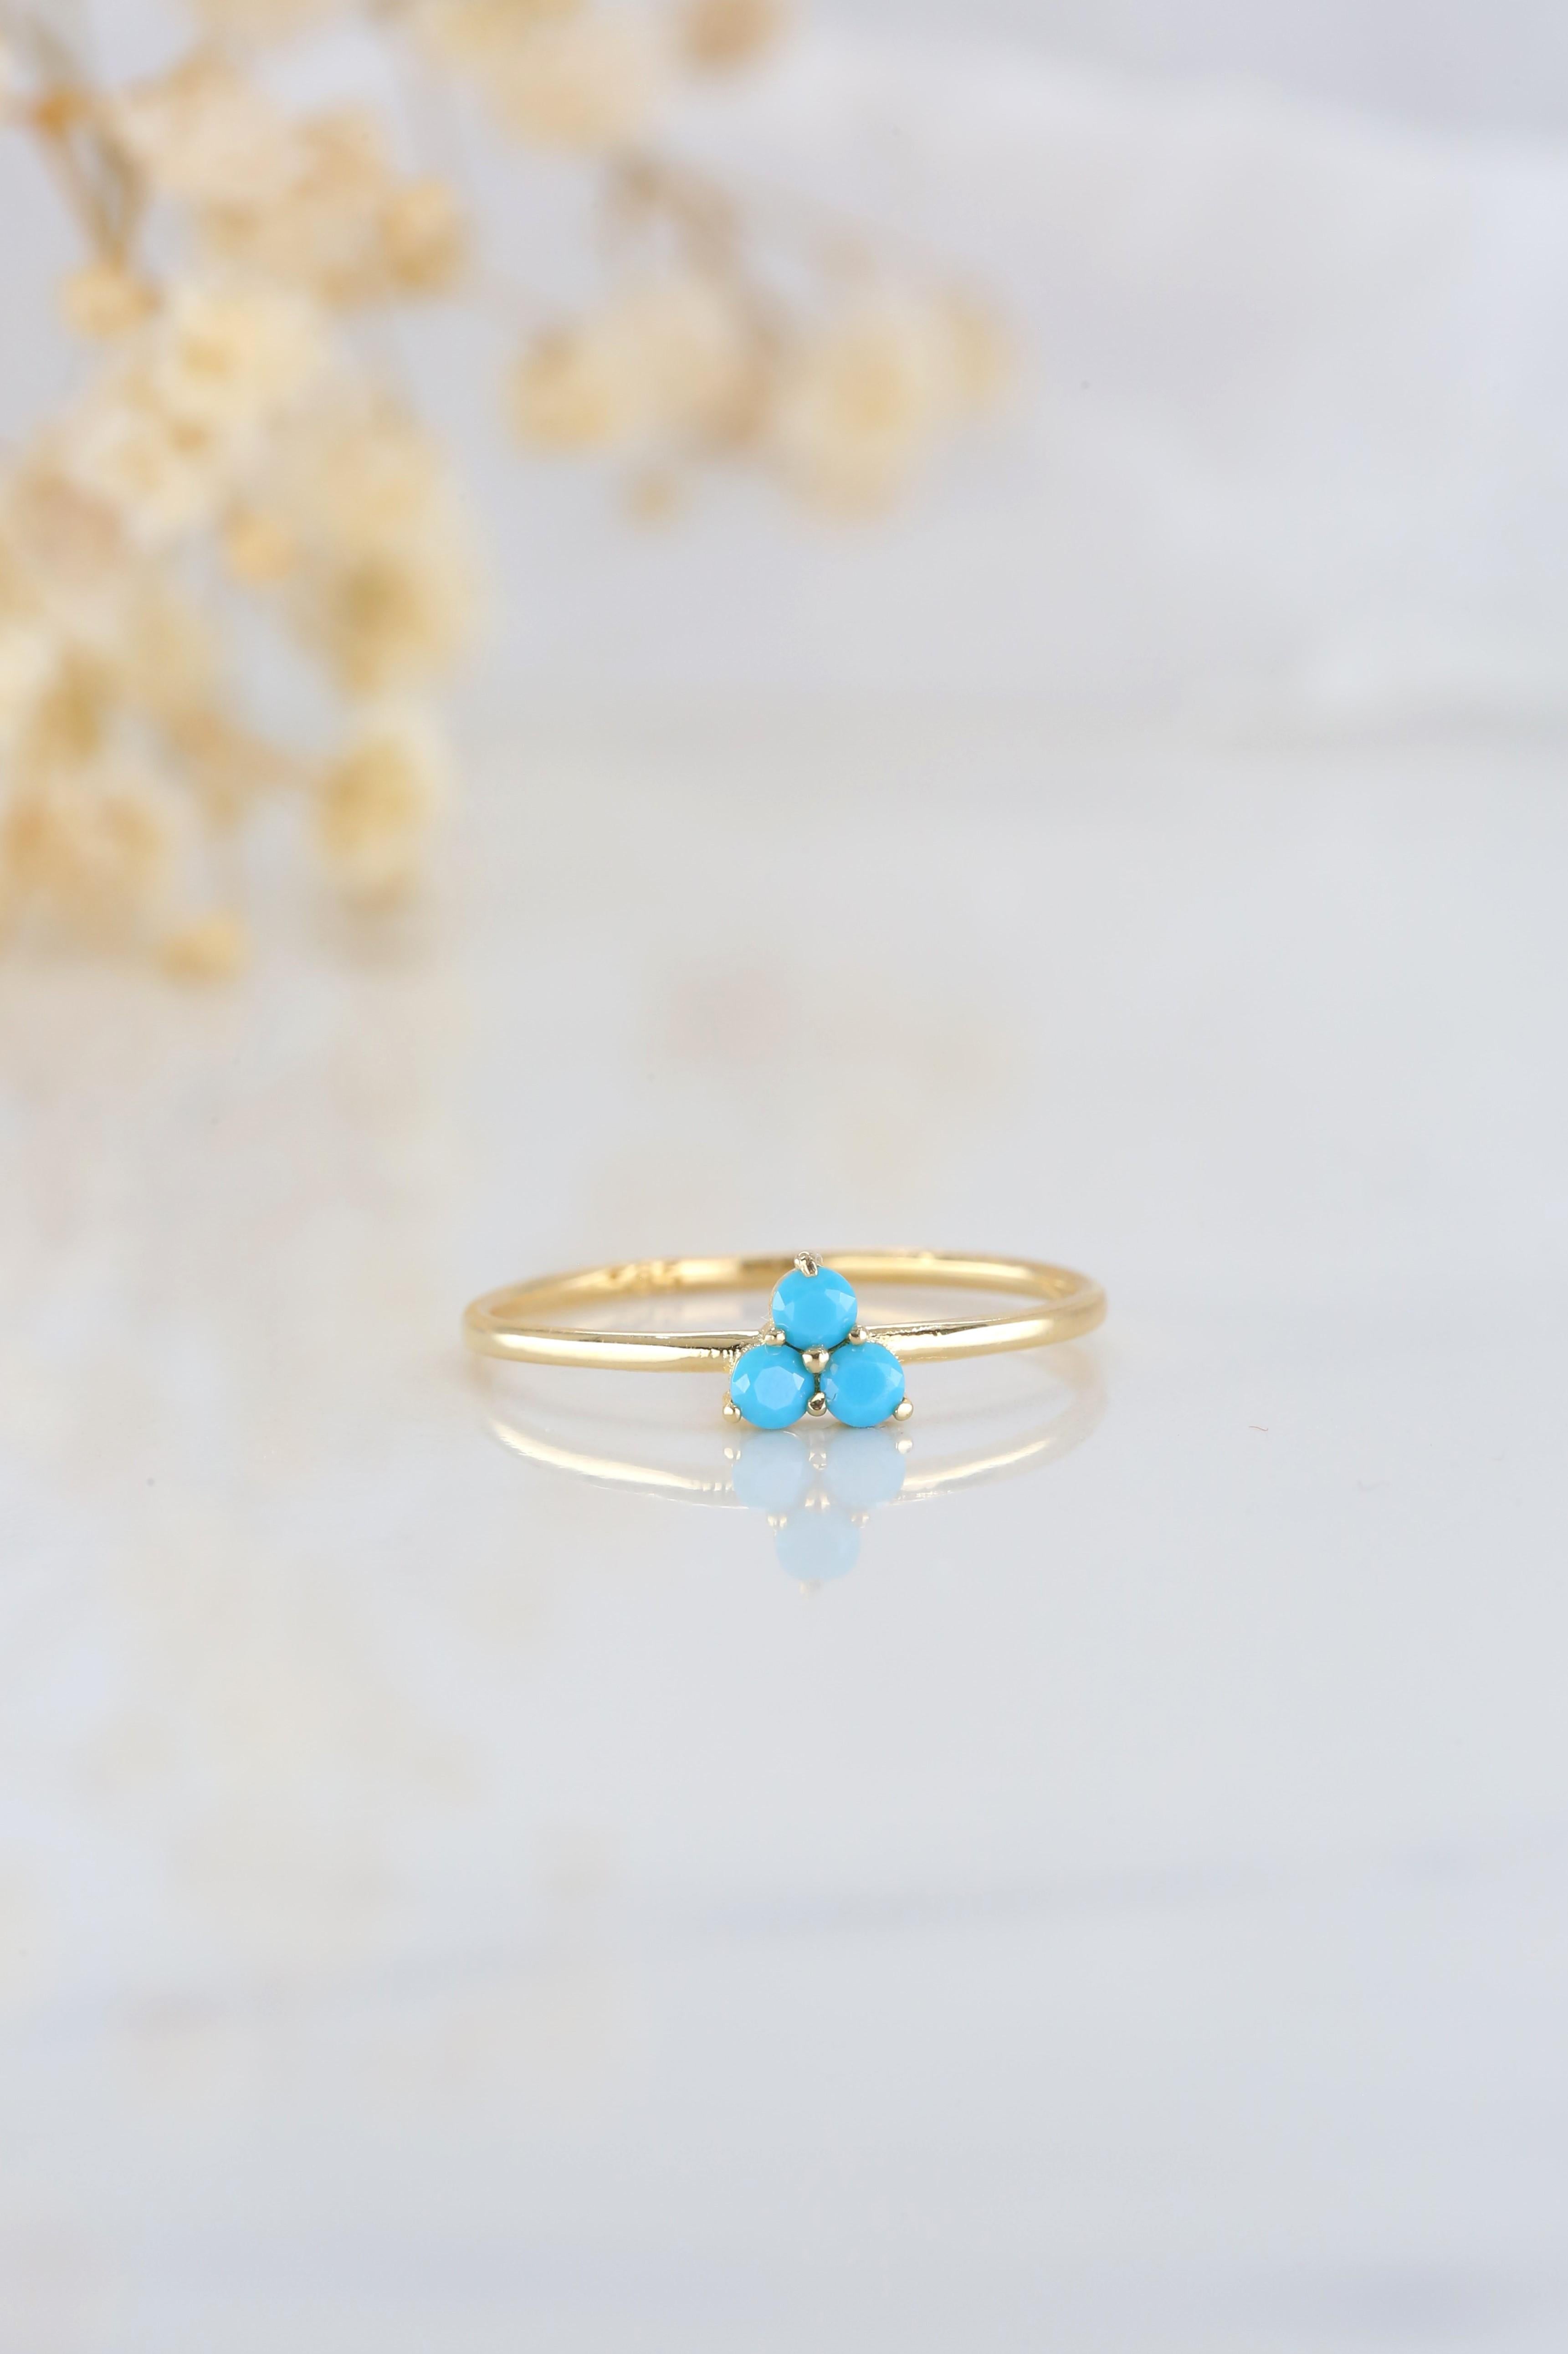 For Sale:  Dainty Turquoise Ring, 14K Dainty Gold Turquoise Ring, Gold Turquoise Ring 5